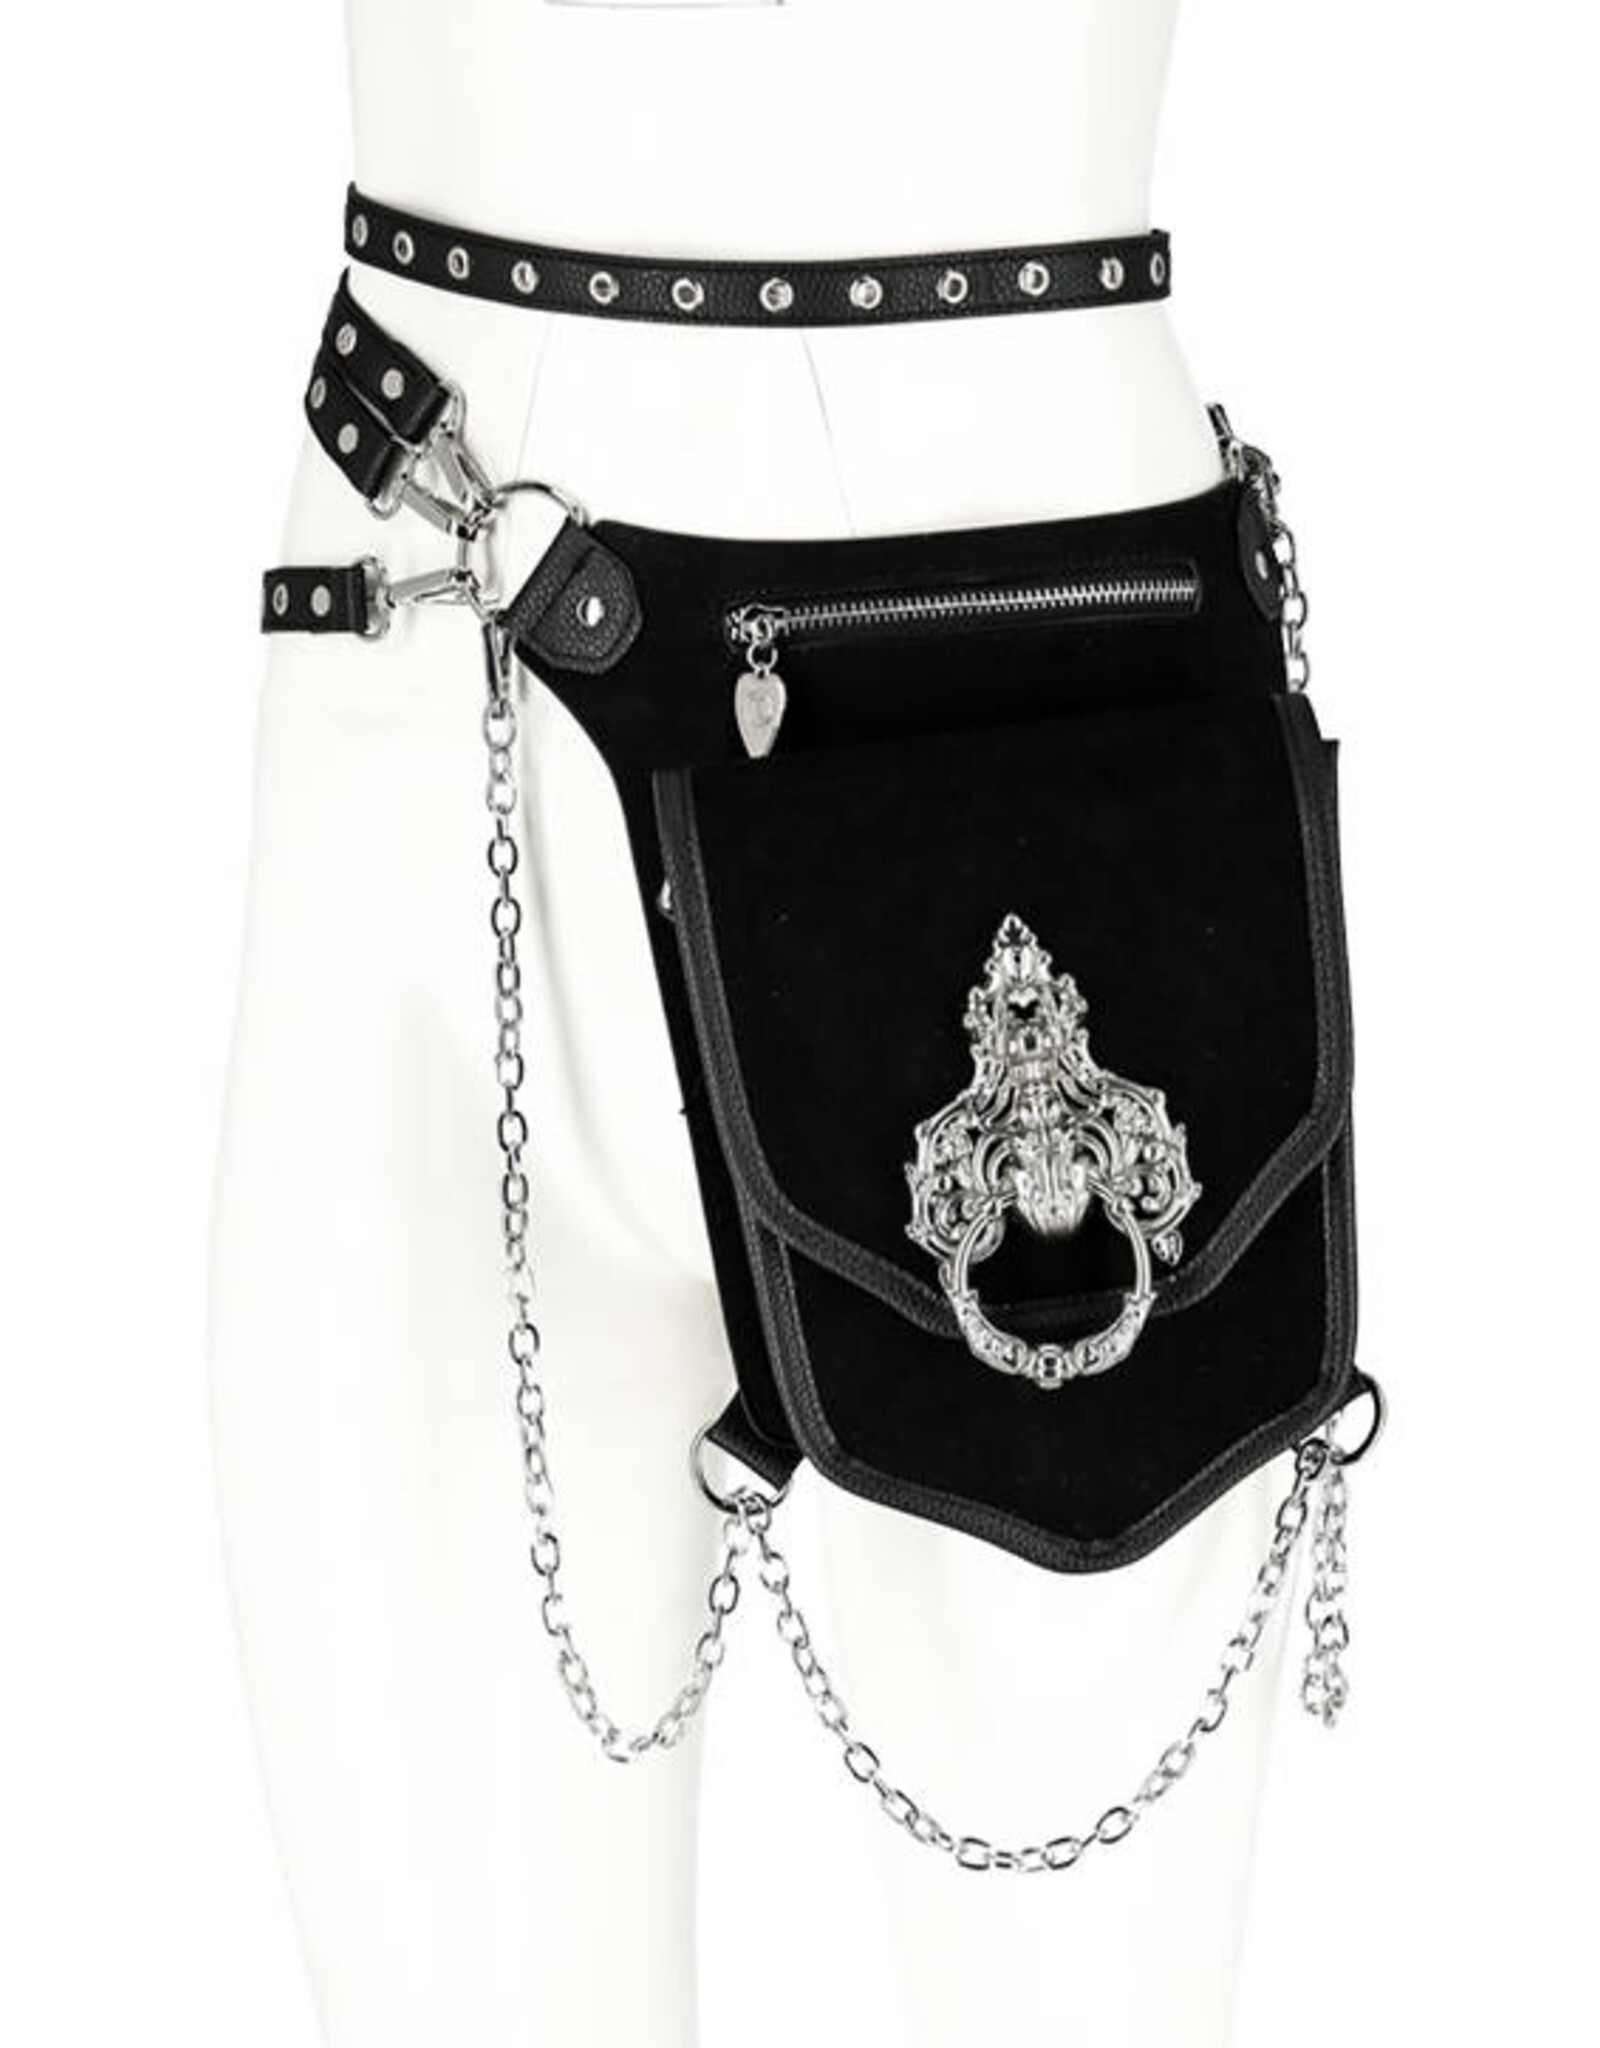 Restyle Gothic bags Steampunk bags - Knocker Holster Belt with Hip Bag Restyle